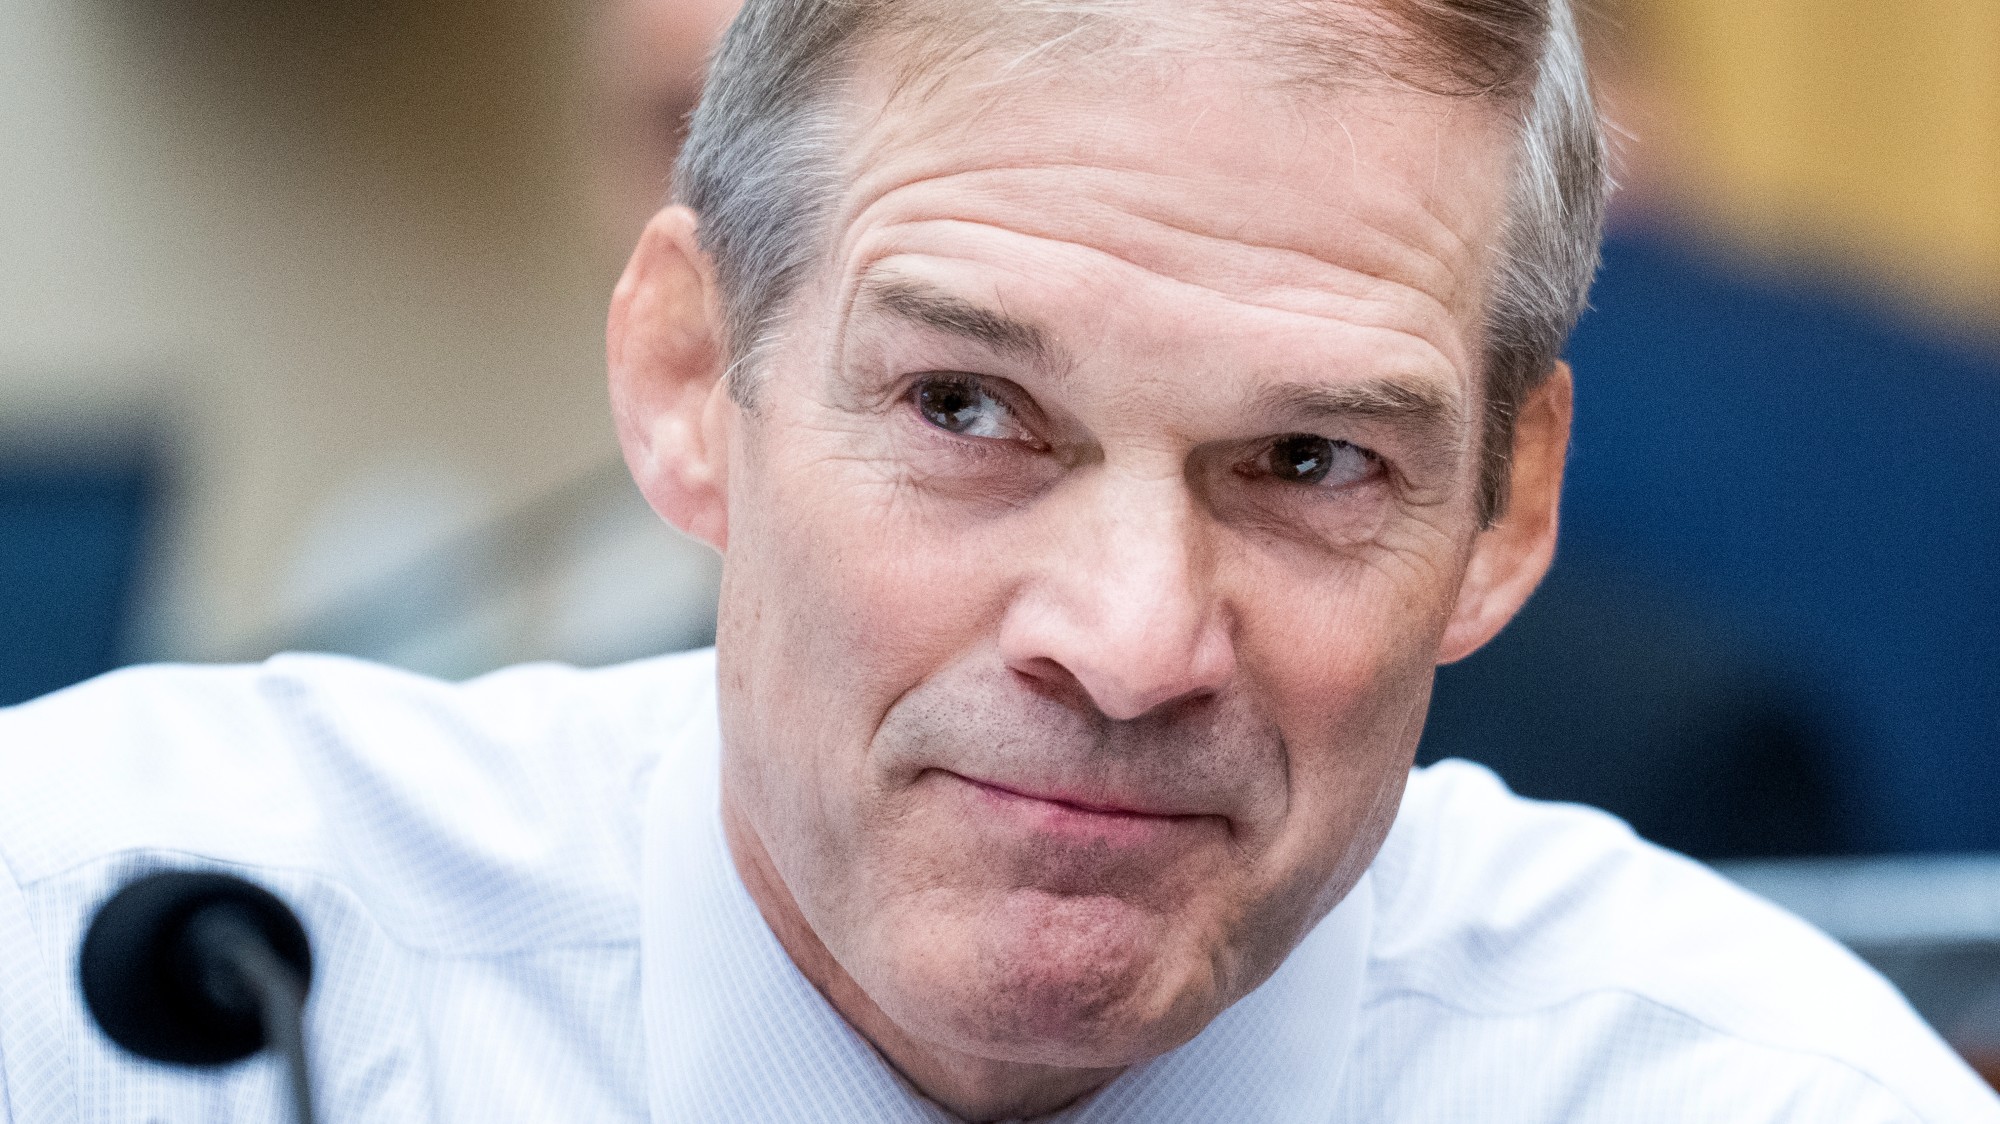 Jim Jordan Tried to Help Trump Mount a Coup. Now He Gets to Be Speaker ...